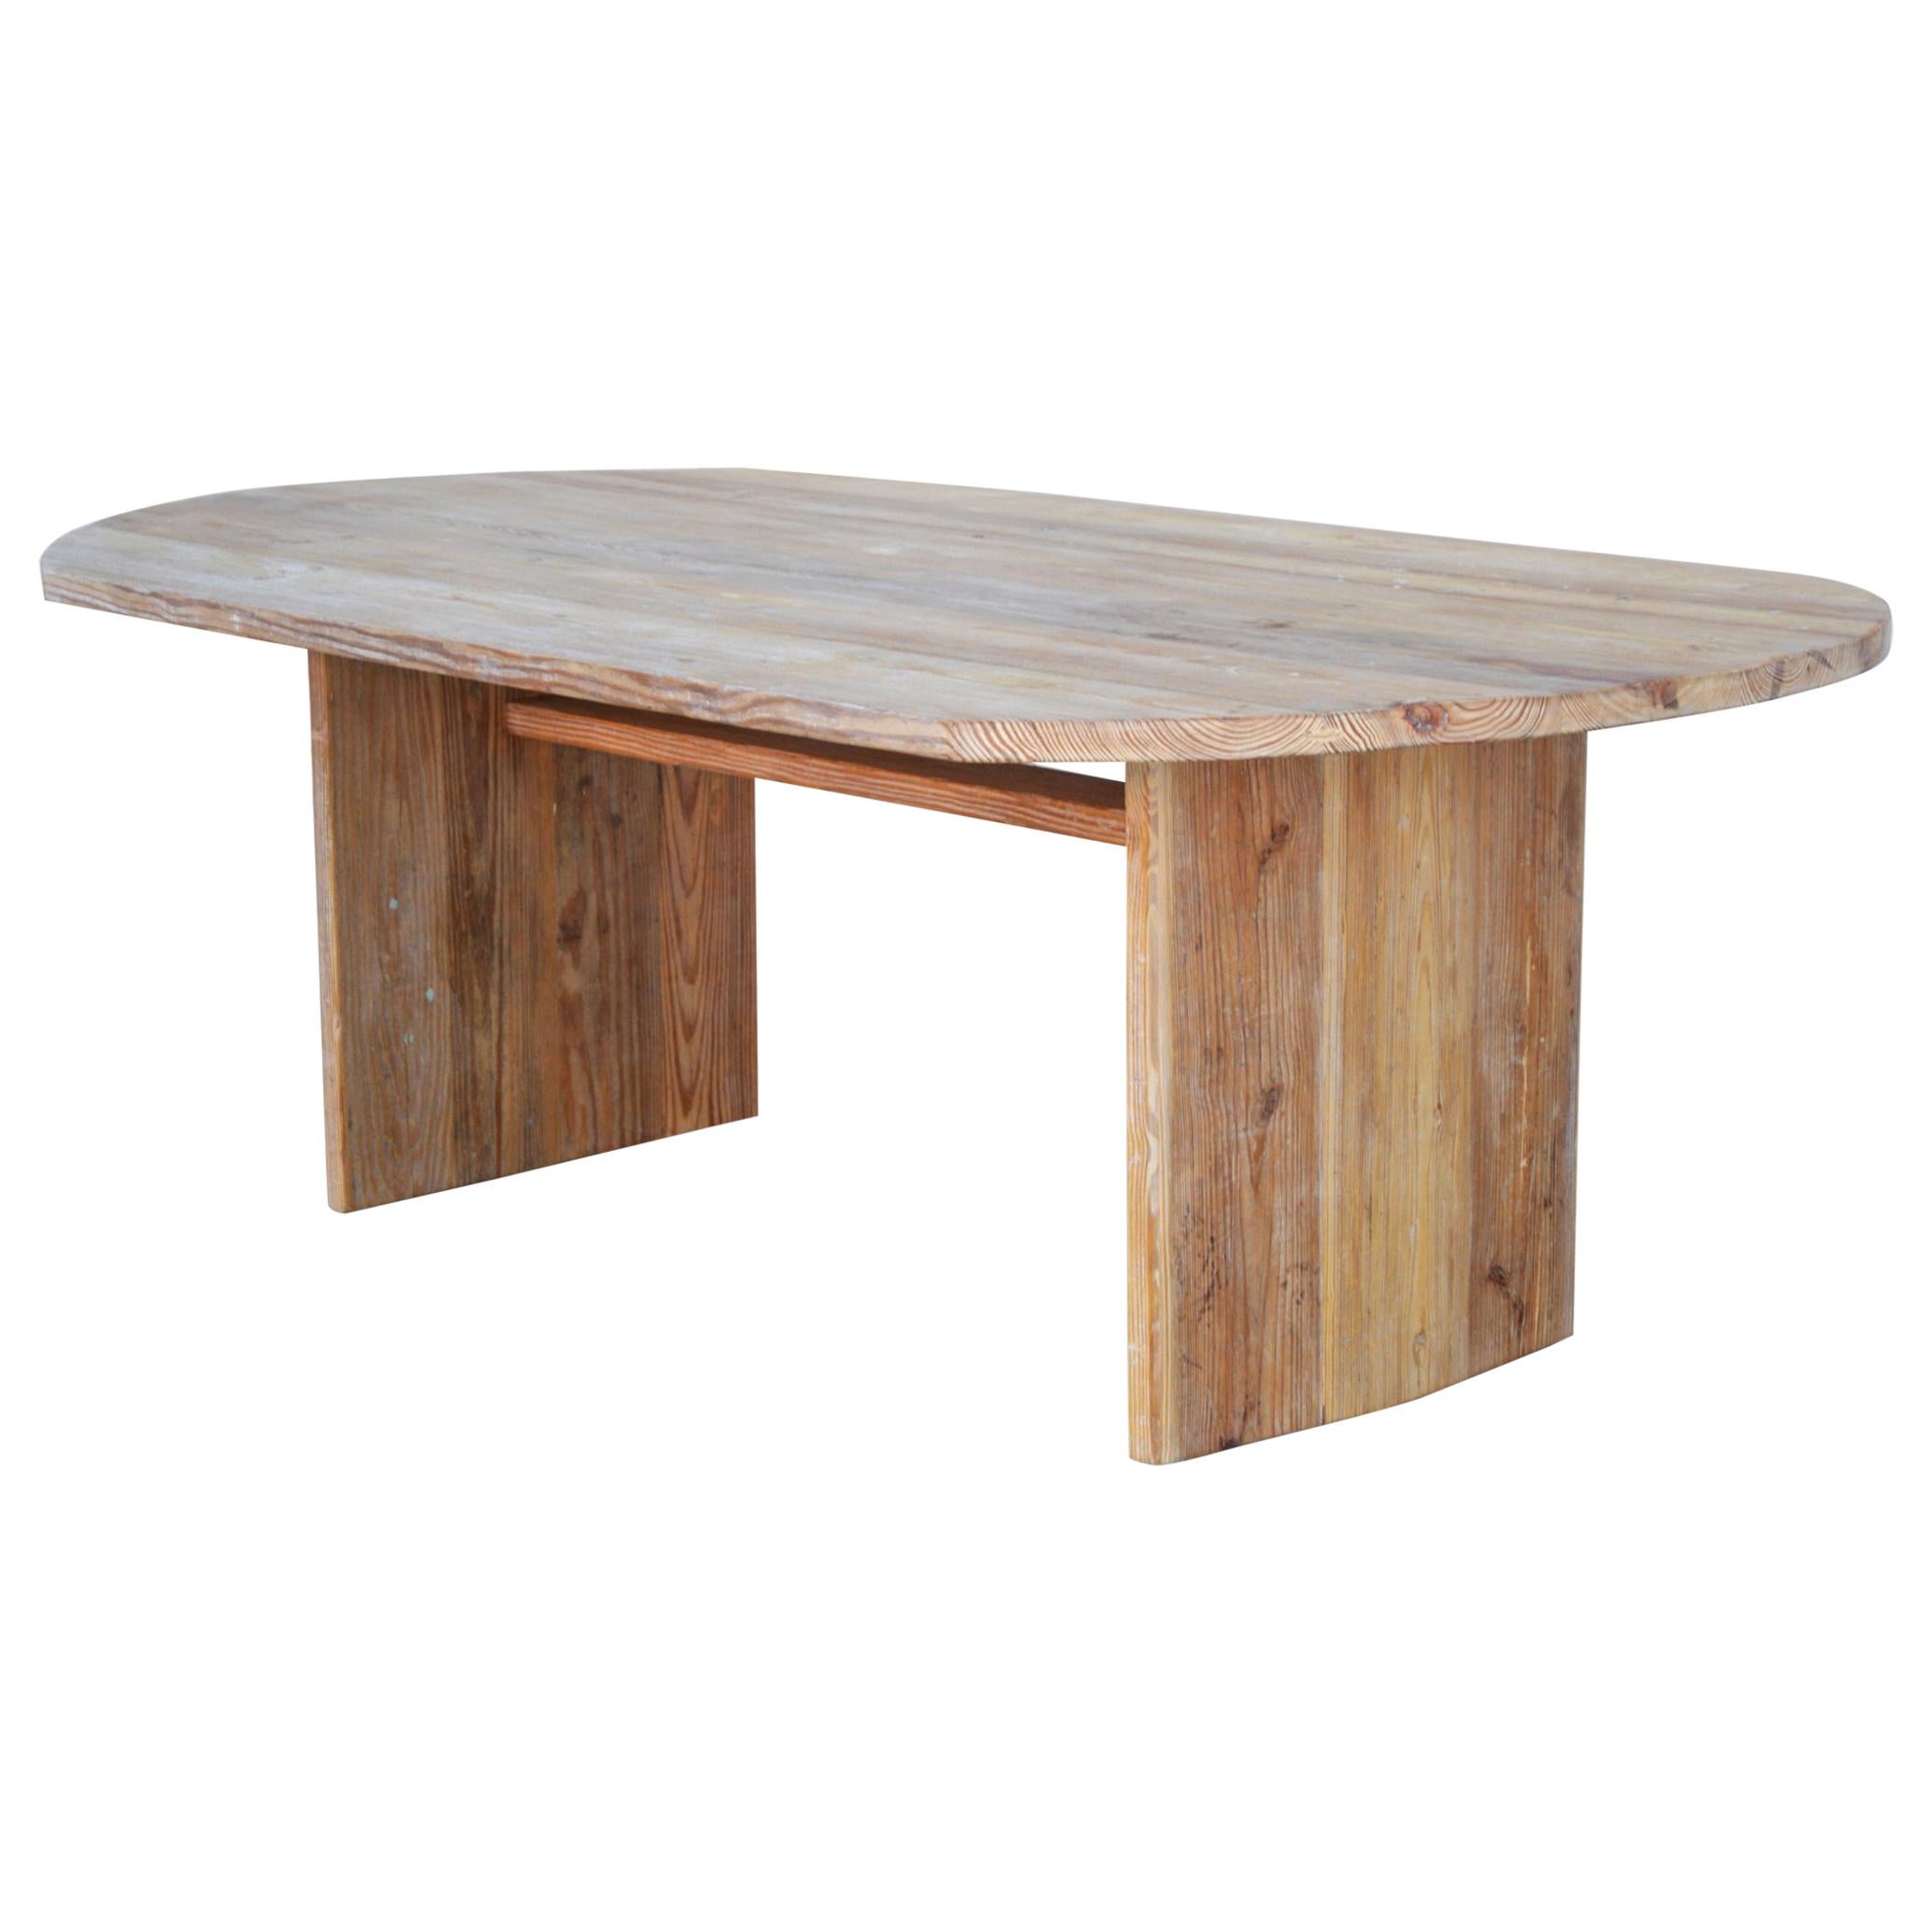 Custom Dining Table Made from Reclaimed Pine